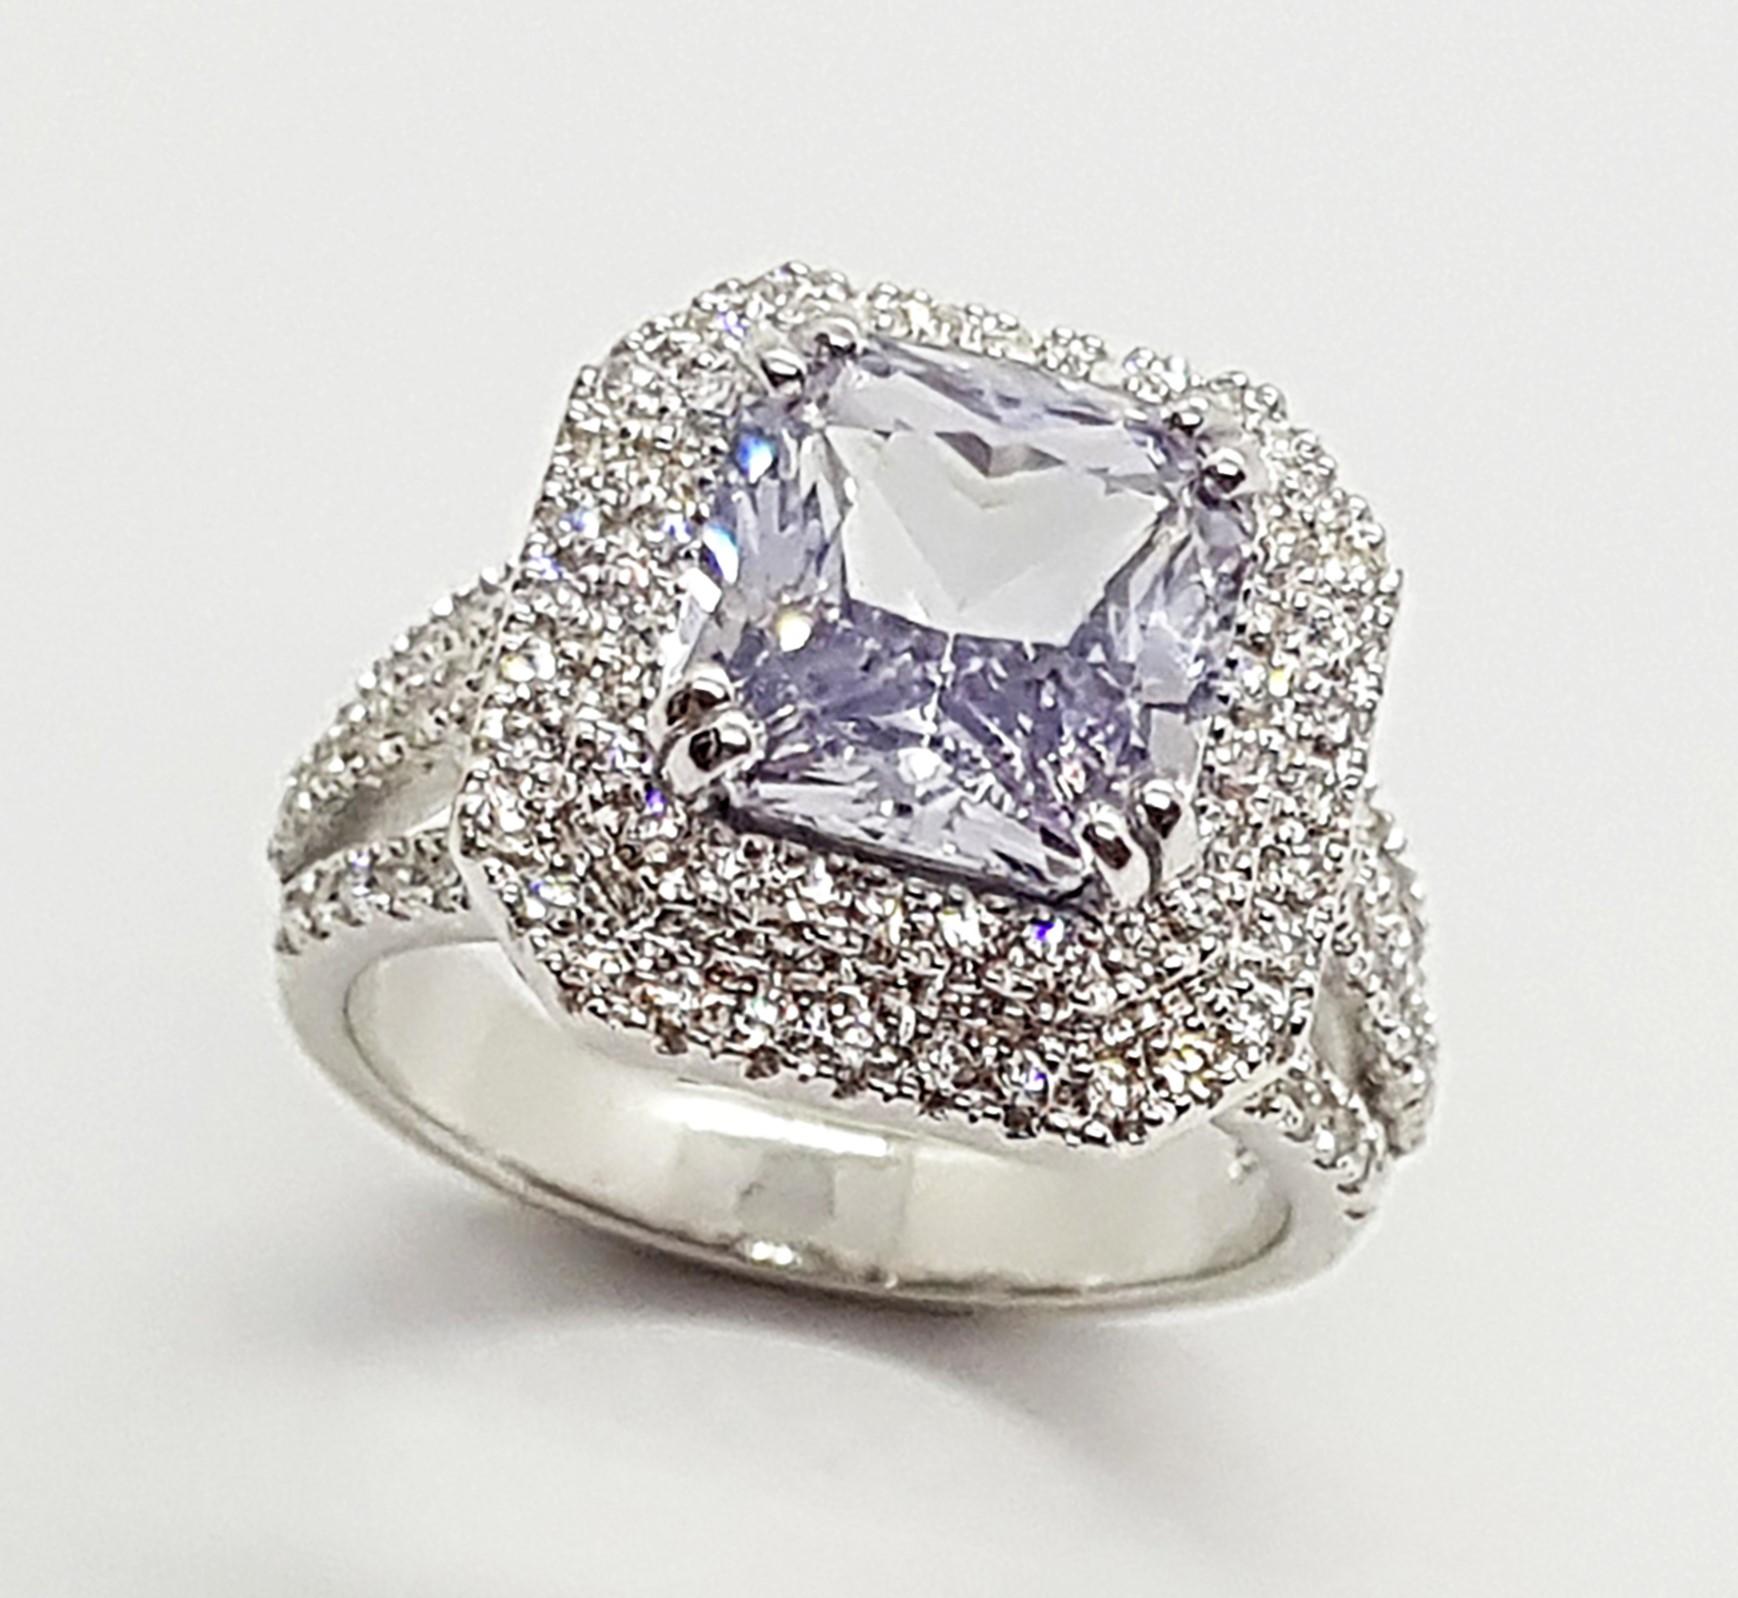 White Sapphire 4.36 carats with Diamond 0.88 carat Ring set in 18 Karat White Gold Settings

Width:  1.5 cm 
Length:  1.5 cm
Ring Size: 54
Total Weight: 9.92 grams

White Sapphire 
Width:  0.9 cm 
Length:  0.9 cm

